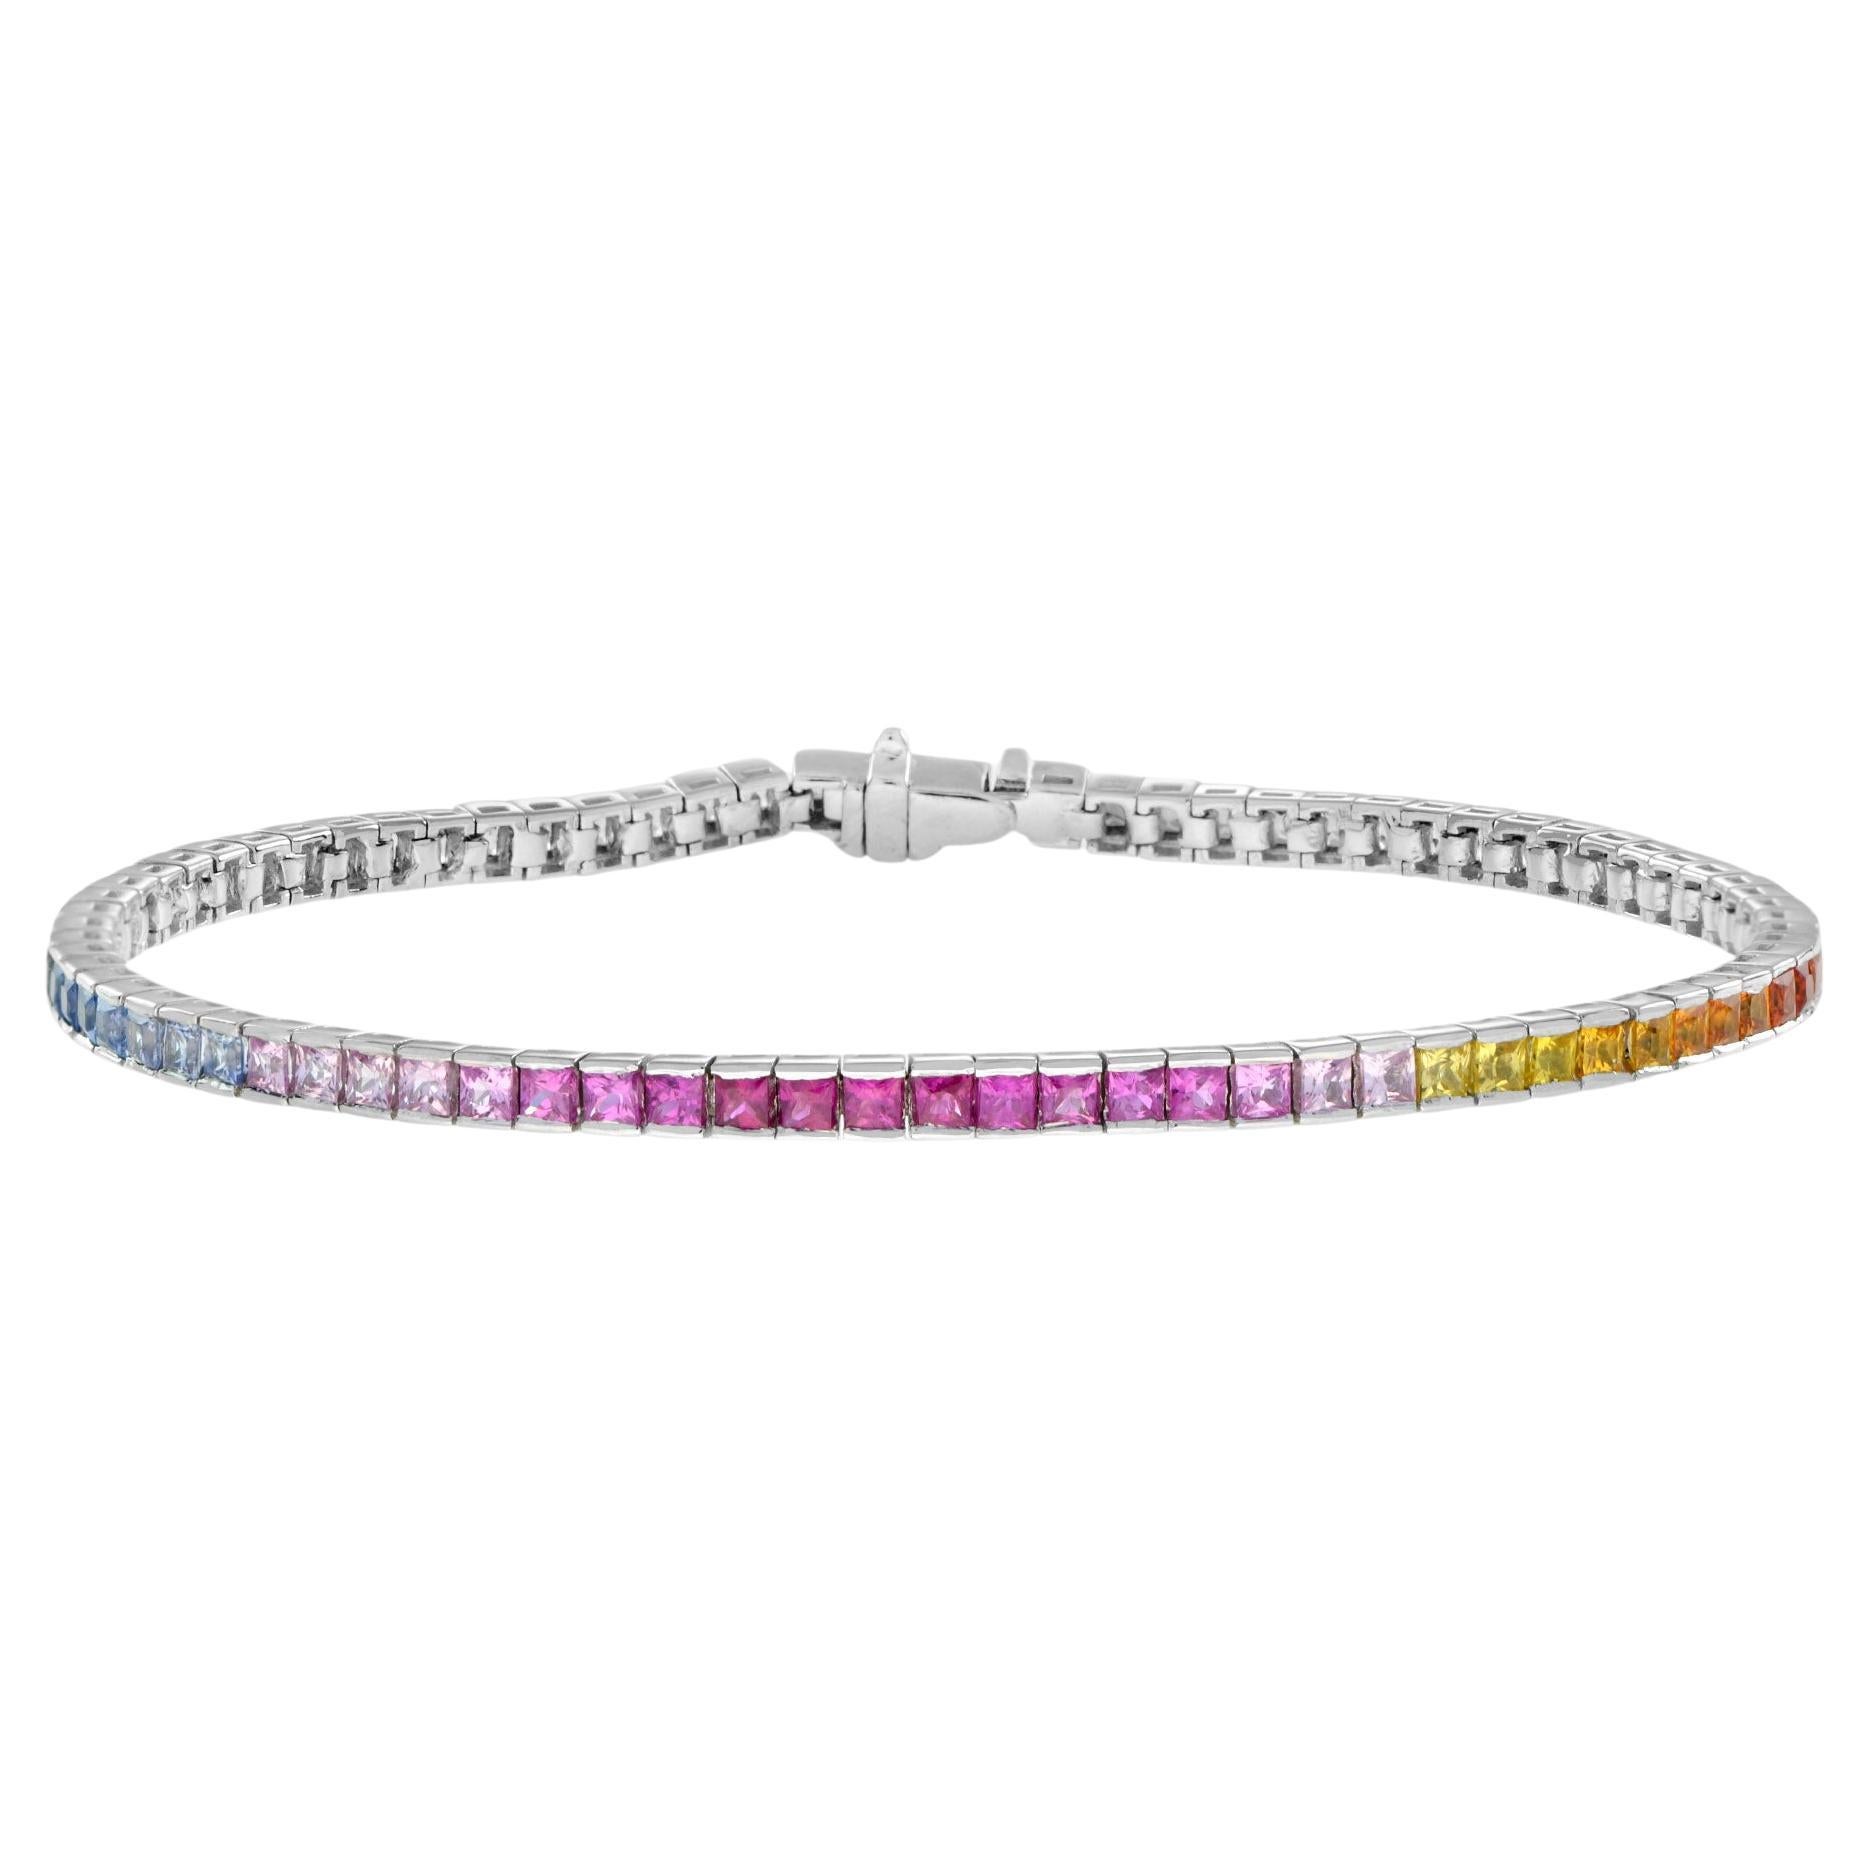 11.20 Ct. Natural Rainbow Sapphire Tennis Bracelet in 18K White Gold For Sale